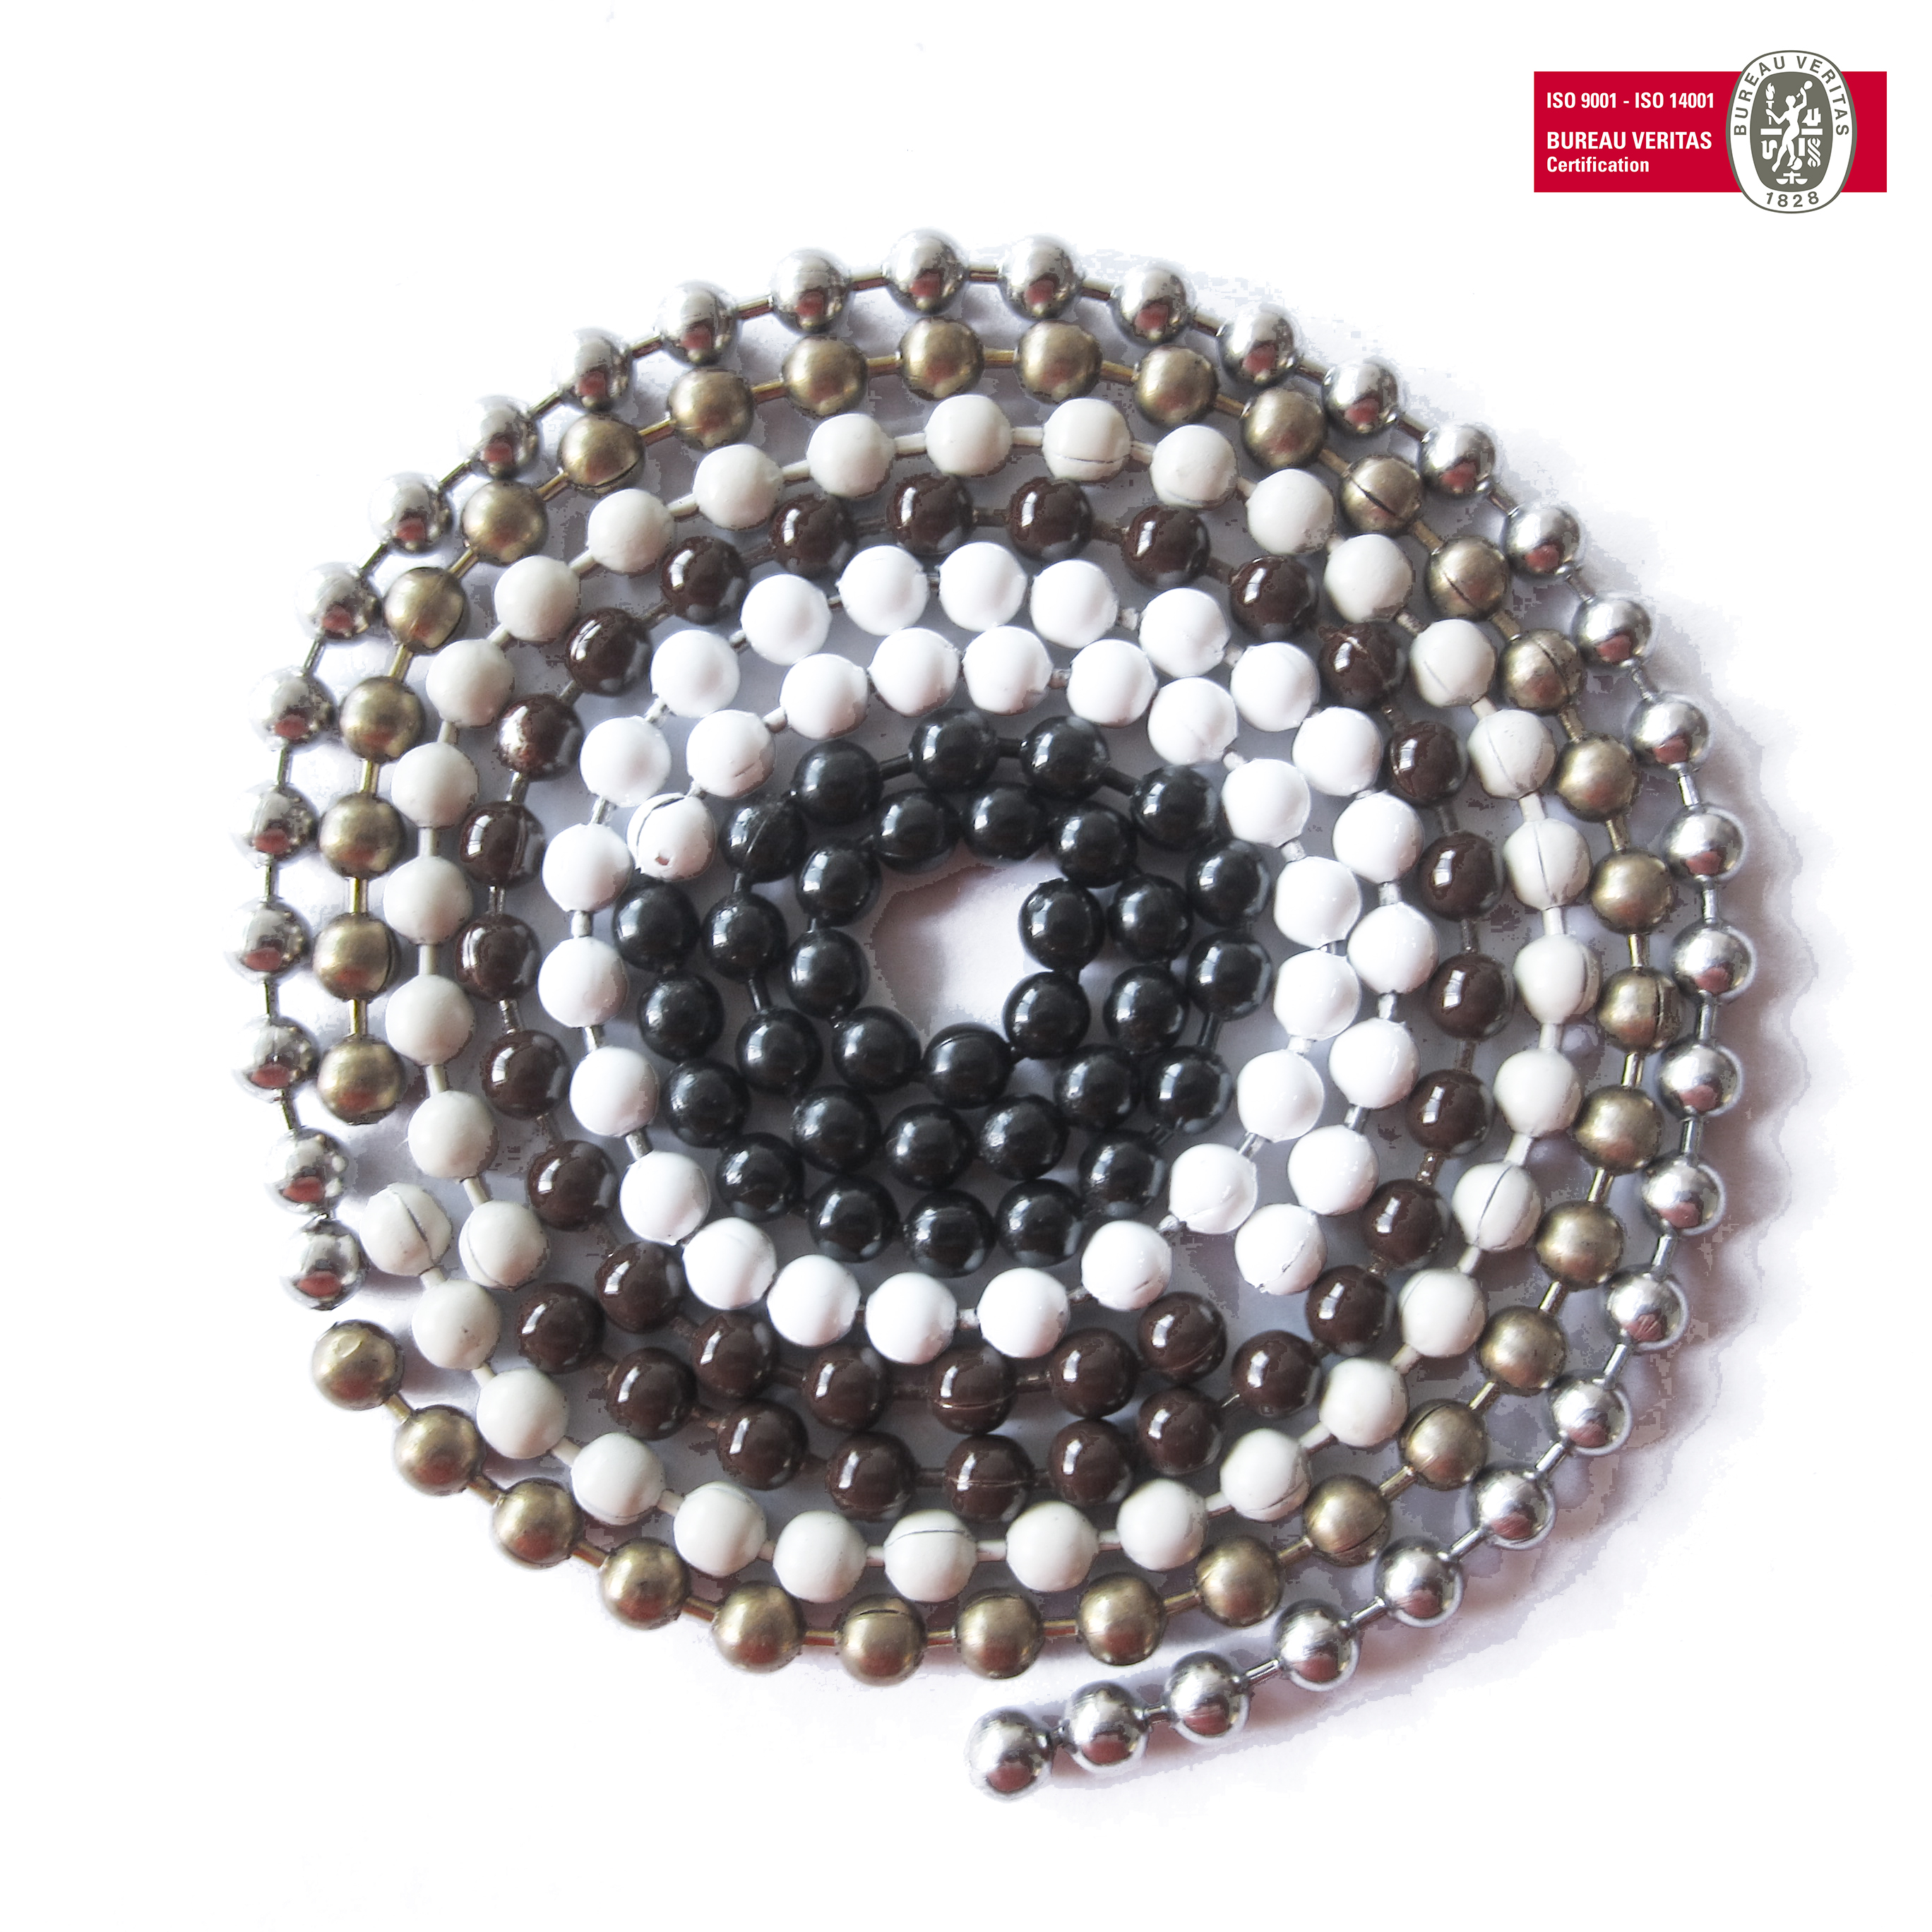 XHX-ZL01 SUS304 Hollow Ball Chain for Roller Shade Window Blind